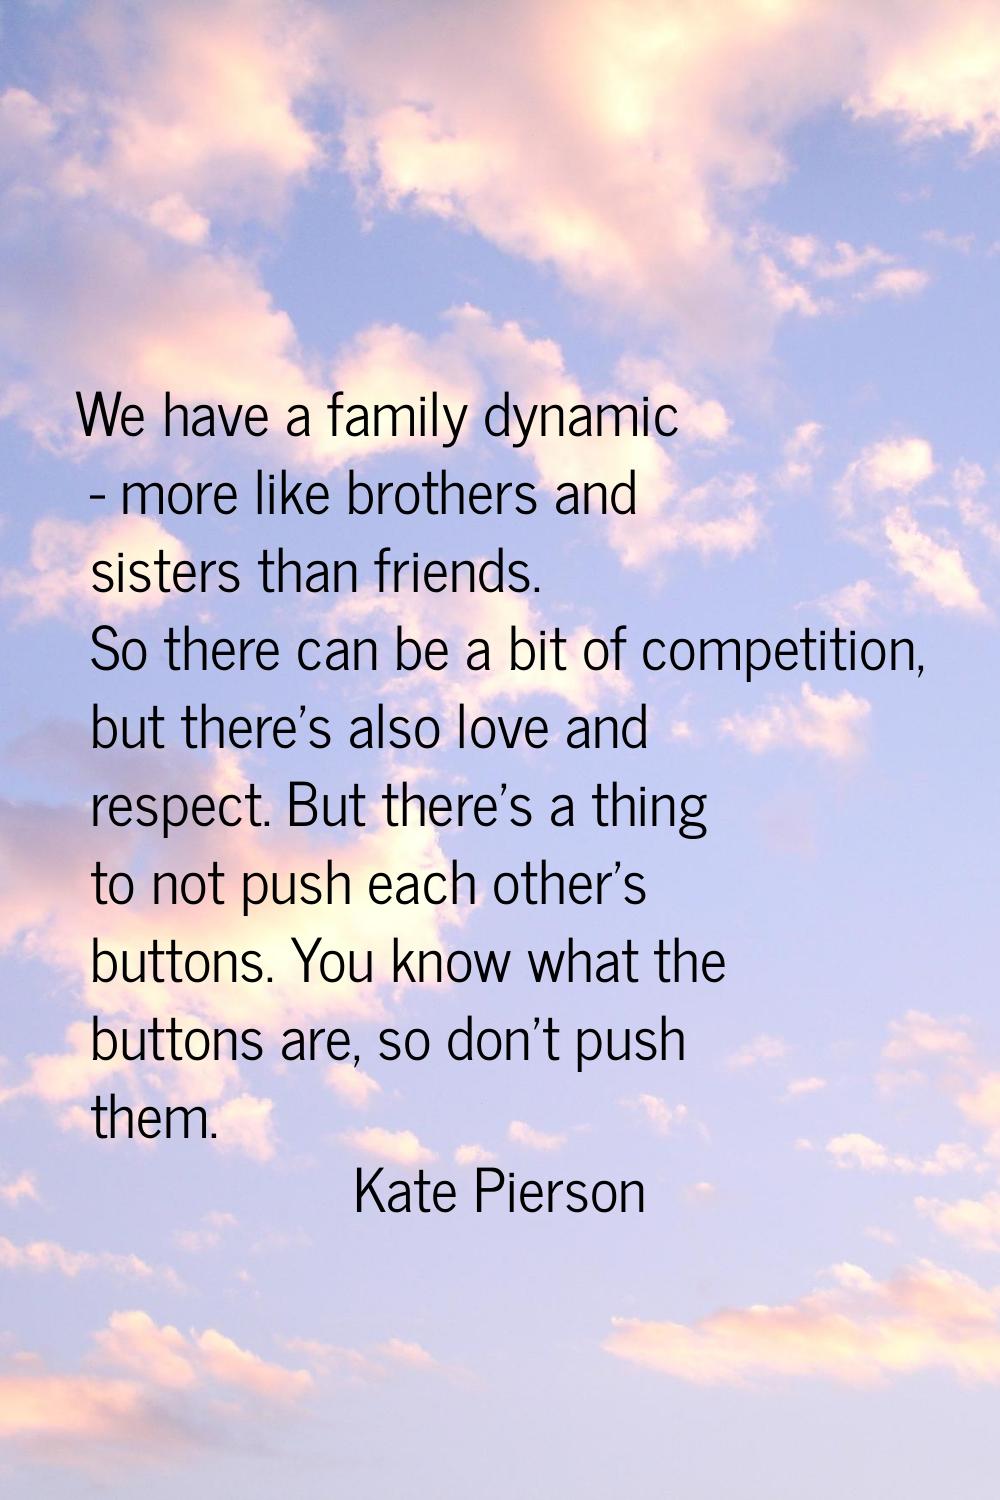 We have a family dynamic - more like brothers and sisters than friends. So there can be a bit of co